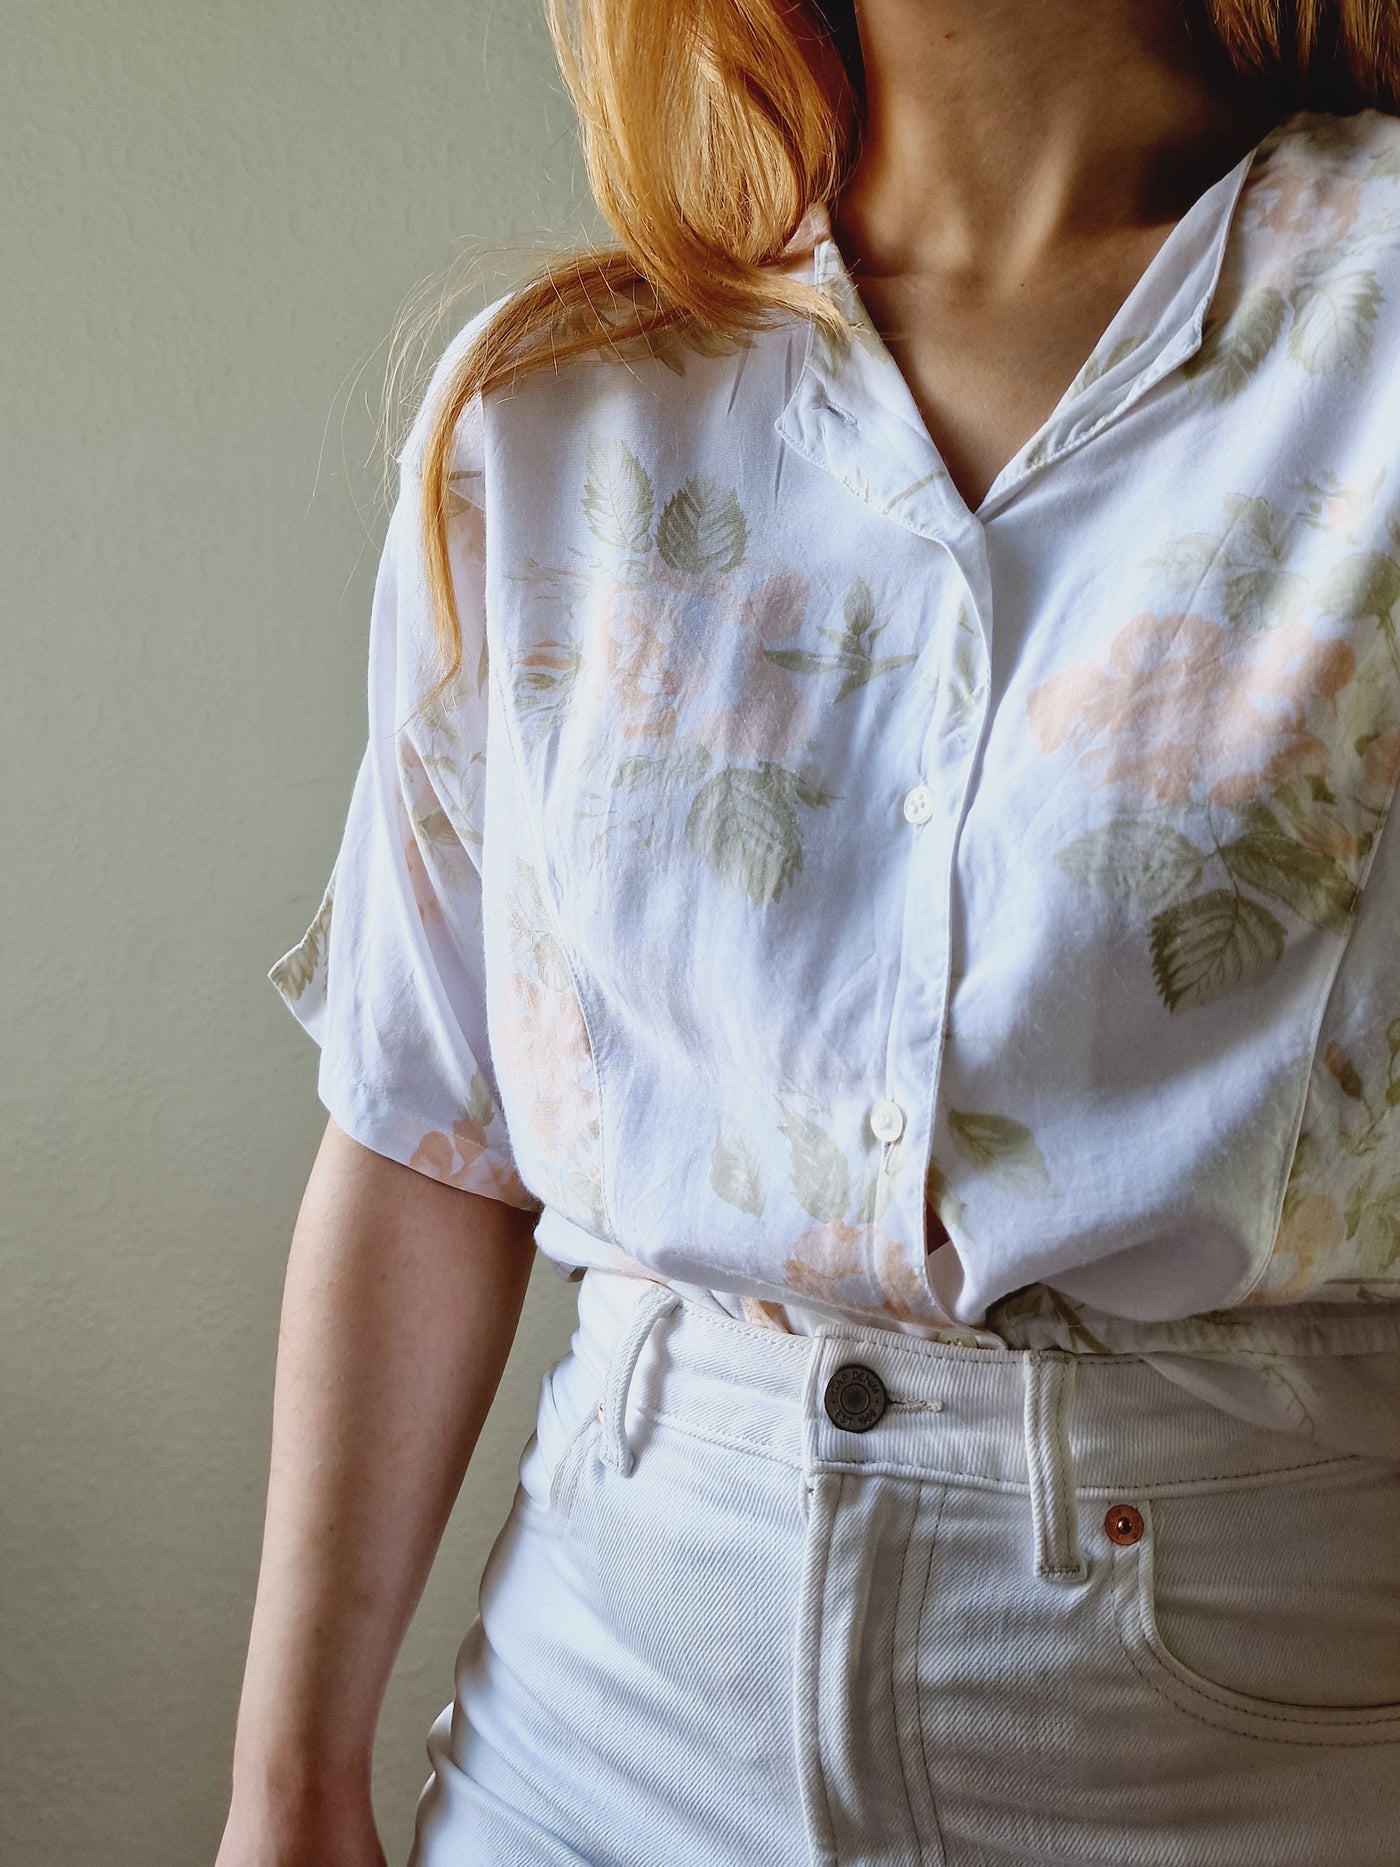 Vintage 80s White Short Sleeve Blouse with Pink Floral Print - M